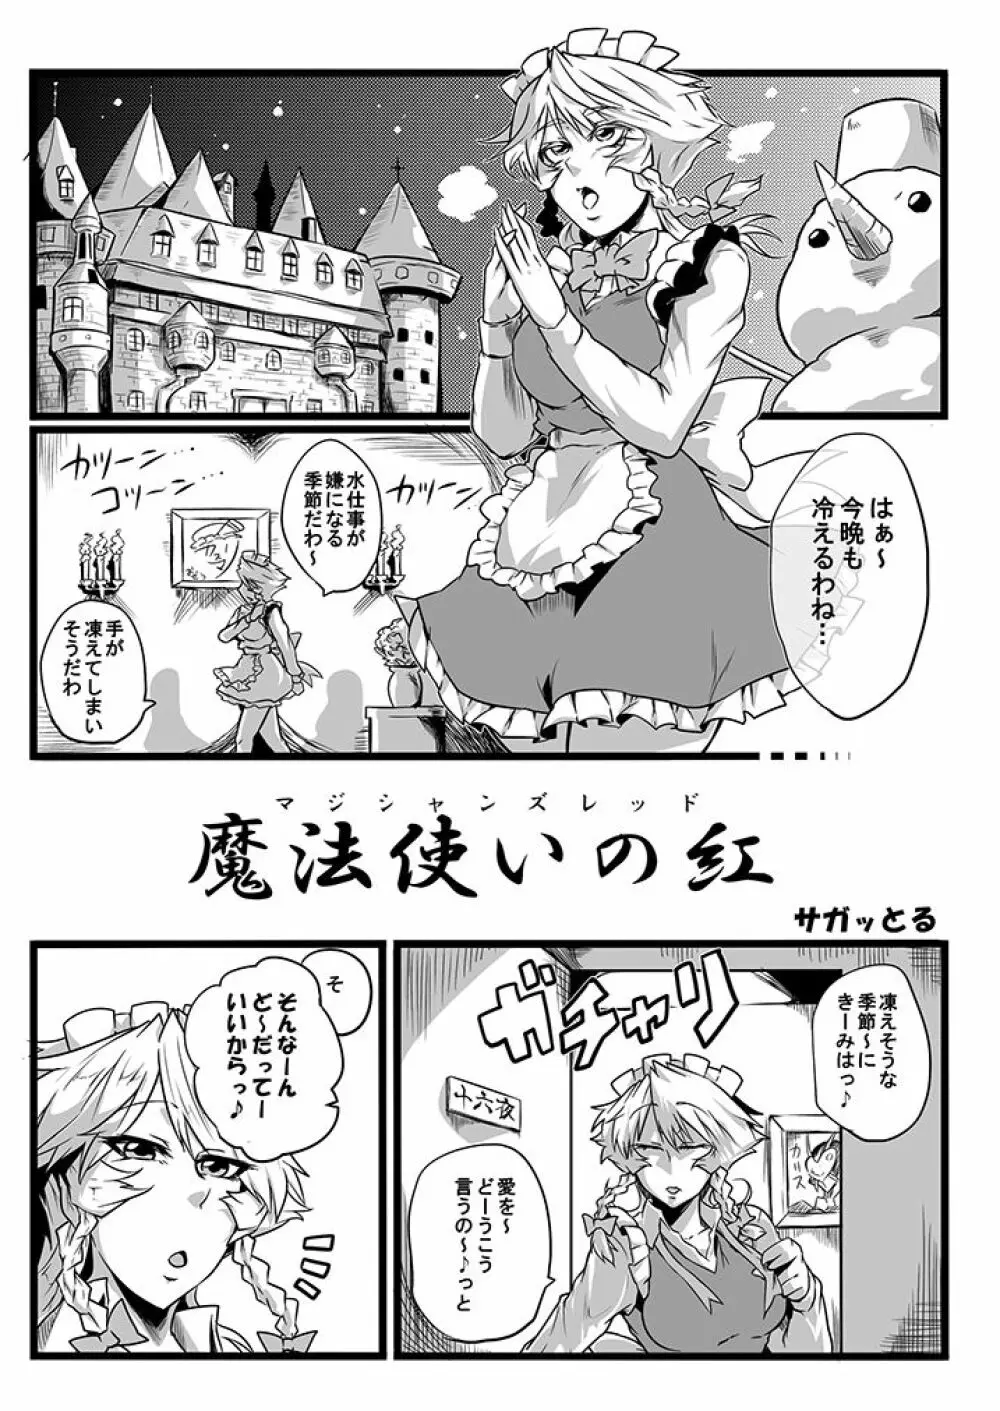 SAKUYA MAID in HEAVEN/ALL IN 1 85ページ